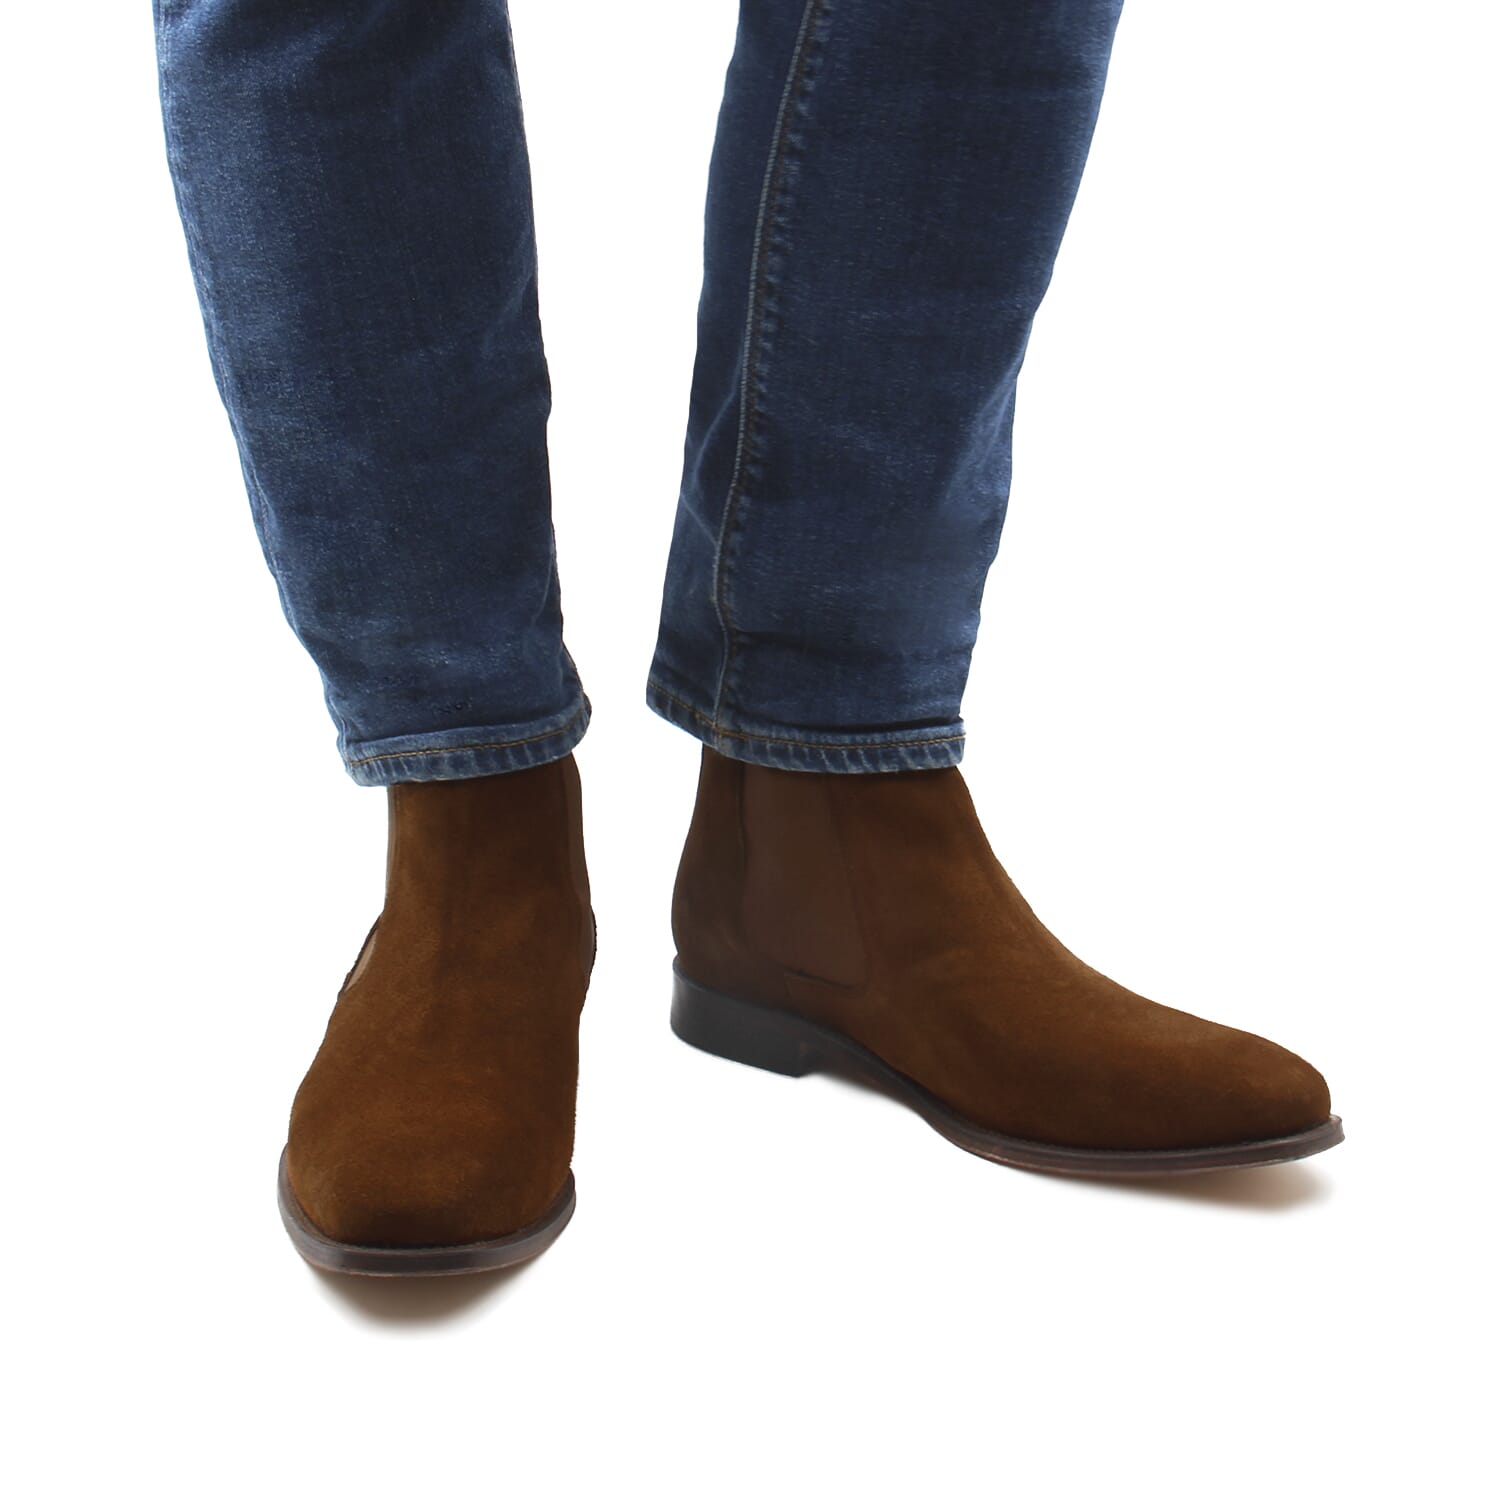 Buy > chelsea boots daim homme > in stock